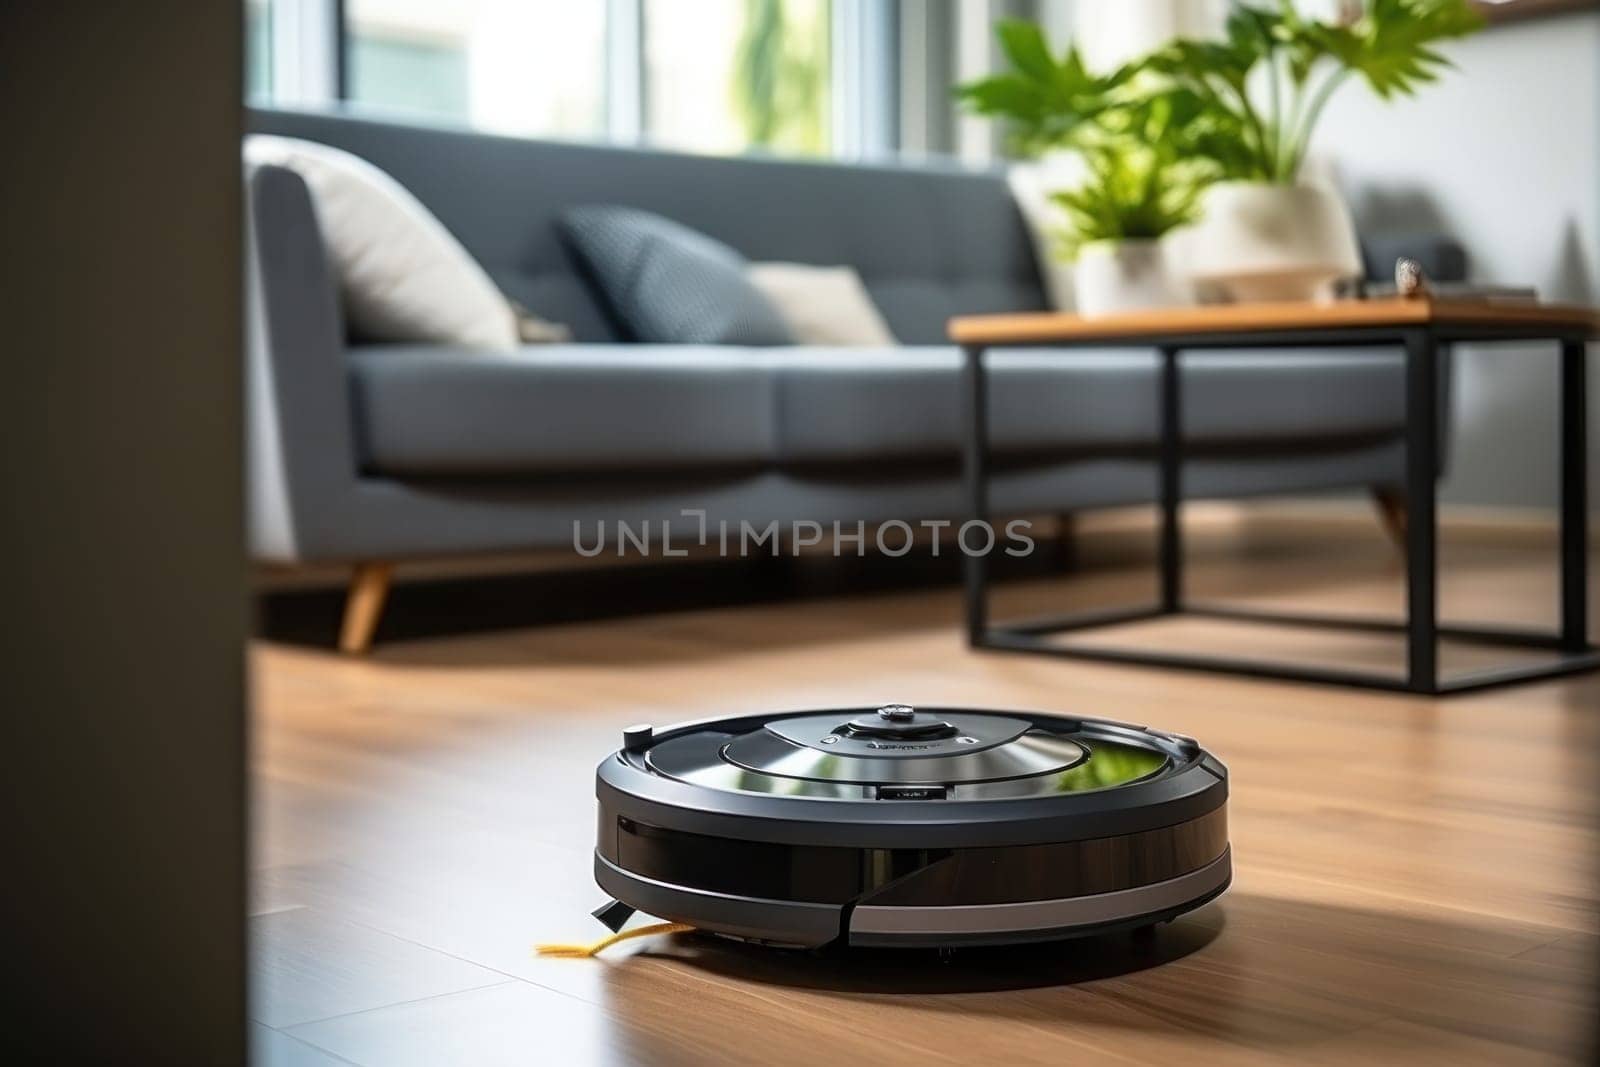 A robot vacuum cleaner is cleaning the living room floor. Generative AI.